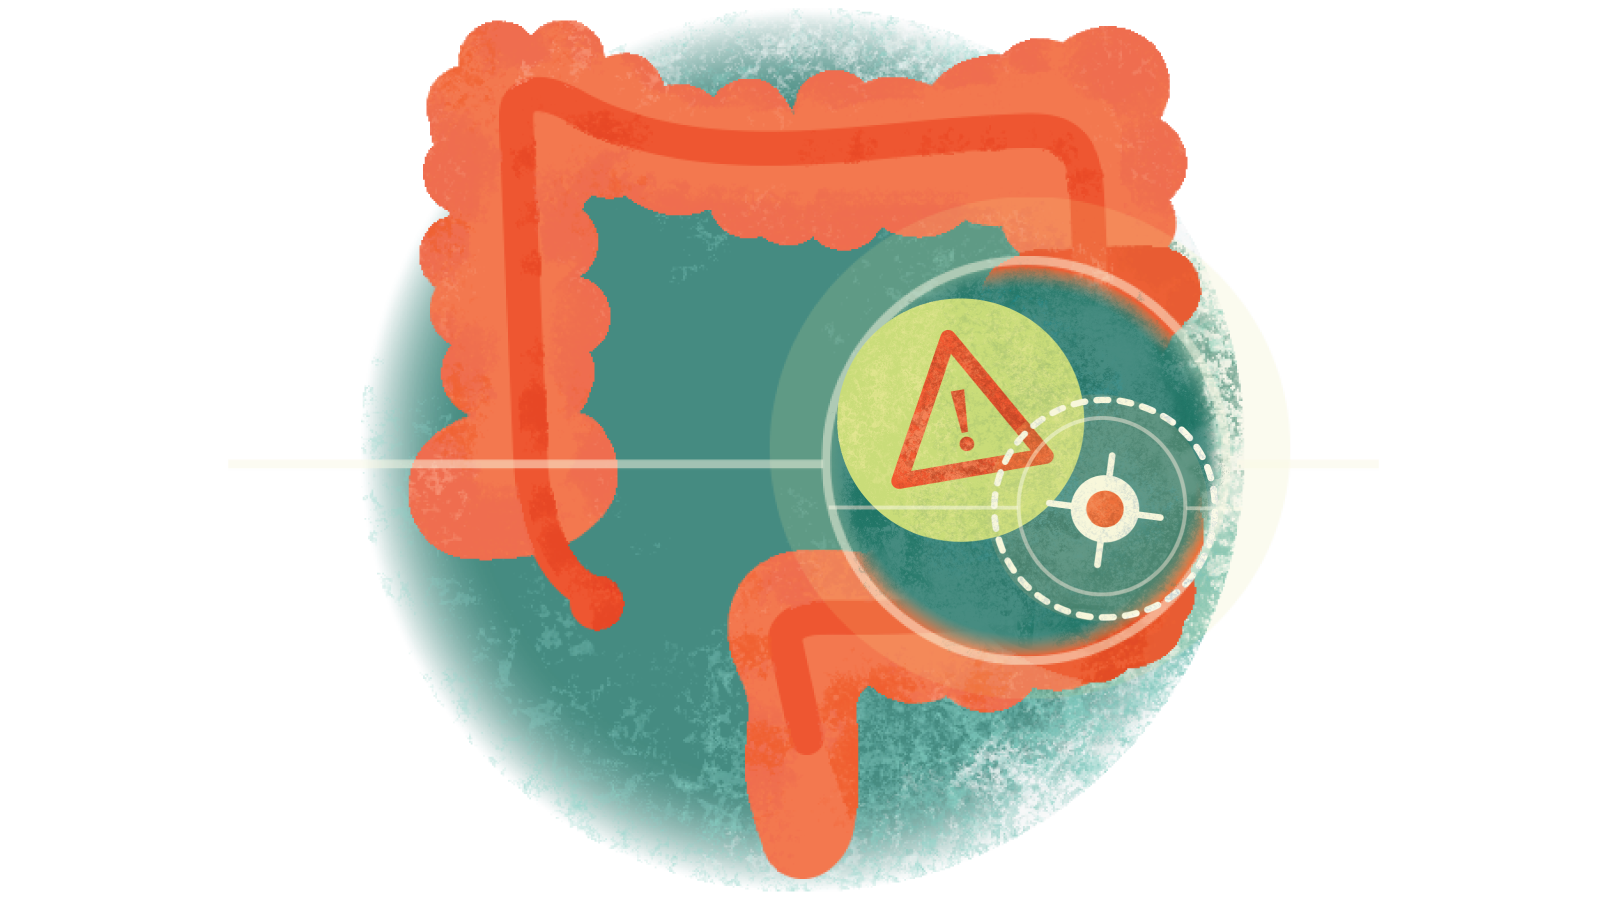 Illustration of a compass with an exclamation point inside a triangle over a colon with ulcerative colitis 